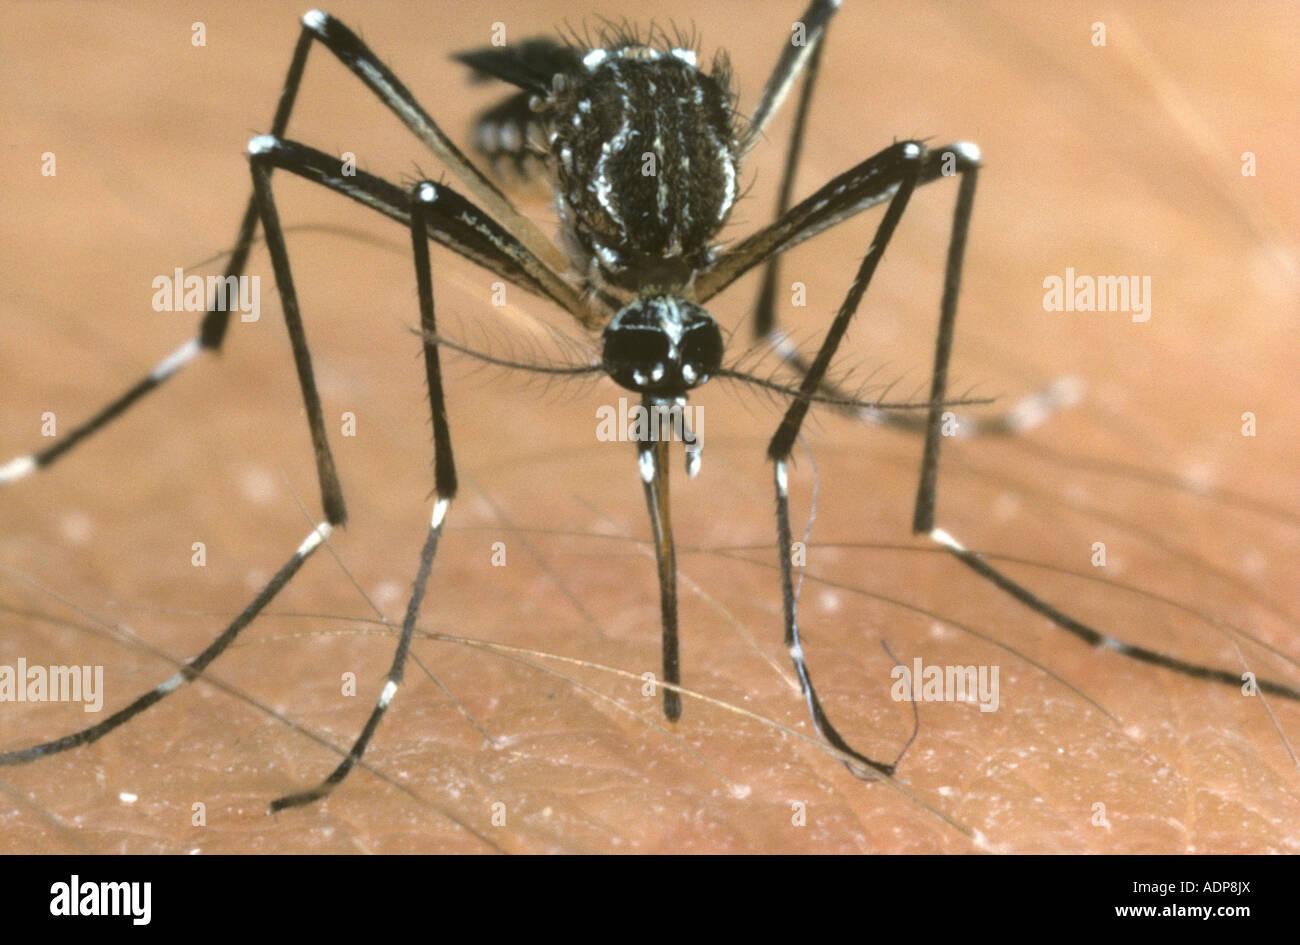 Yellow fever vector mosquito Aedes aegypti feeding on a human arm Stock Photo